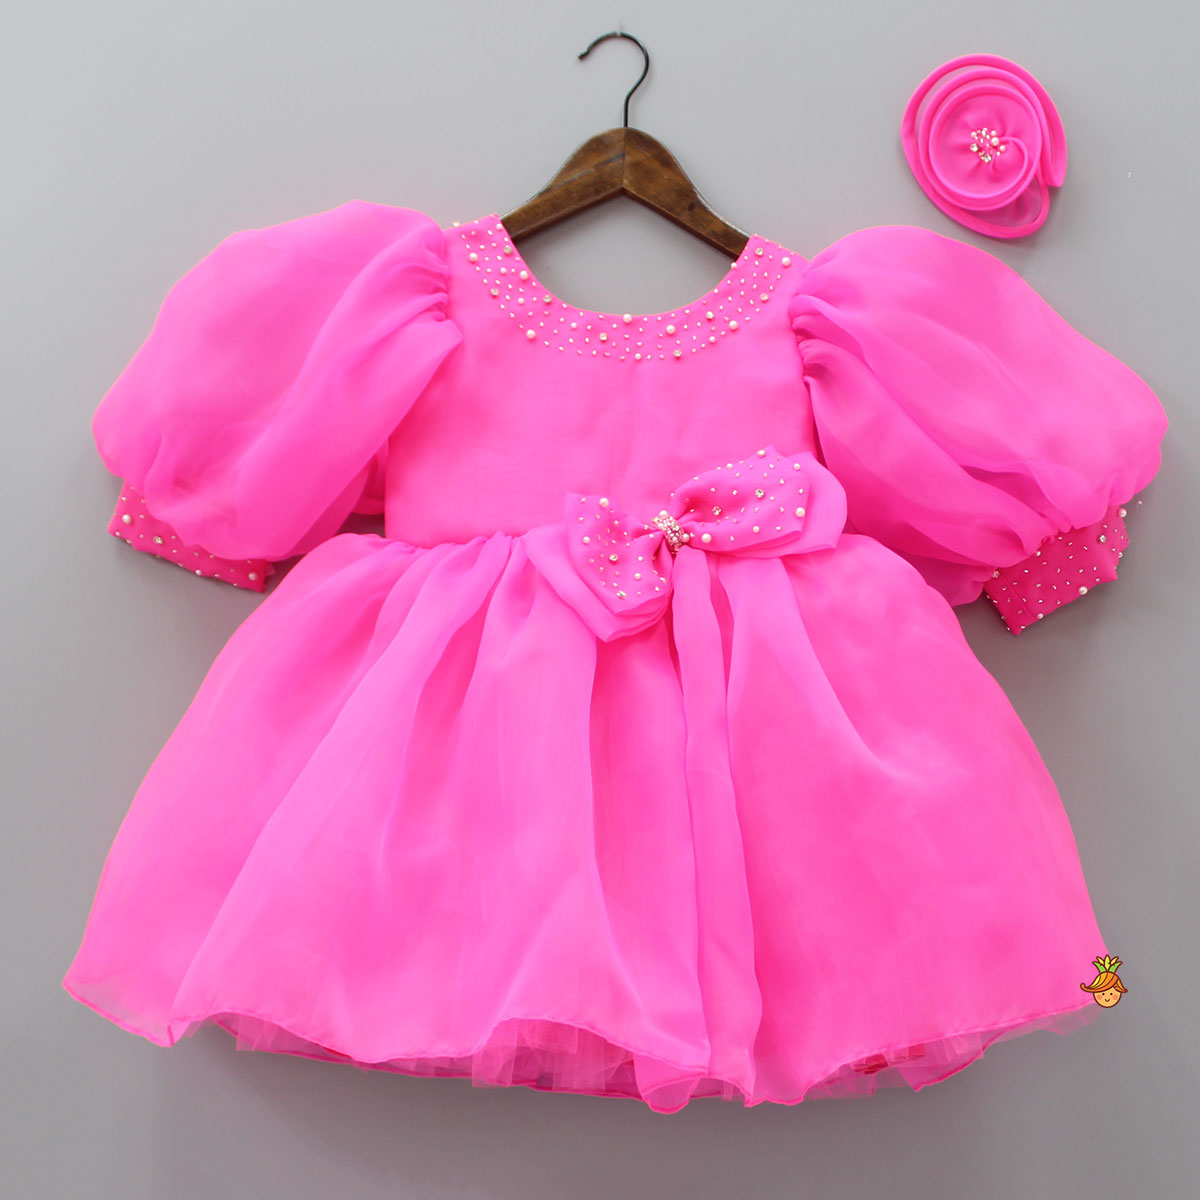 Cut Dana Embellished Gorgeous Pink Dress With Matching Swirled Hair Clip